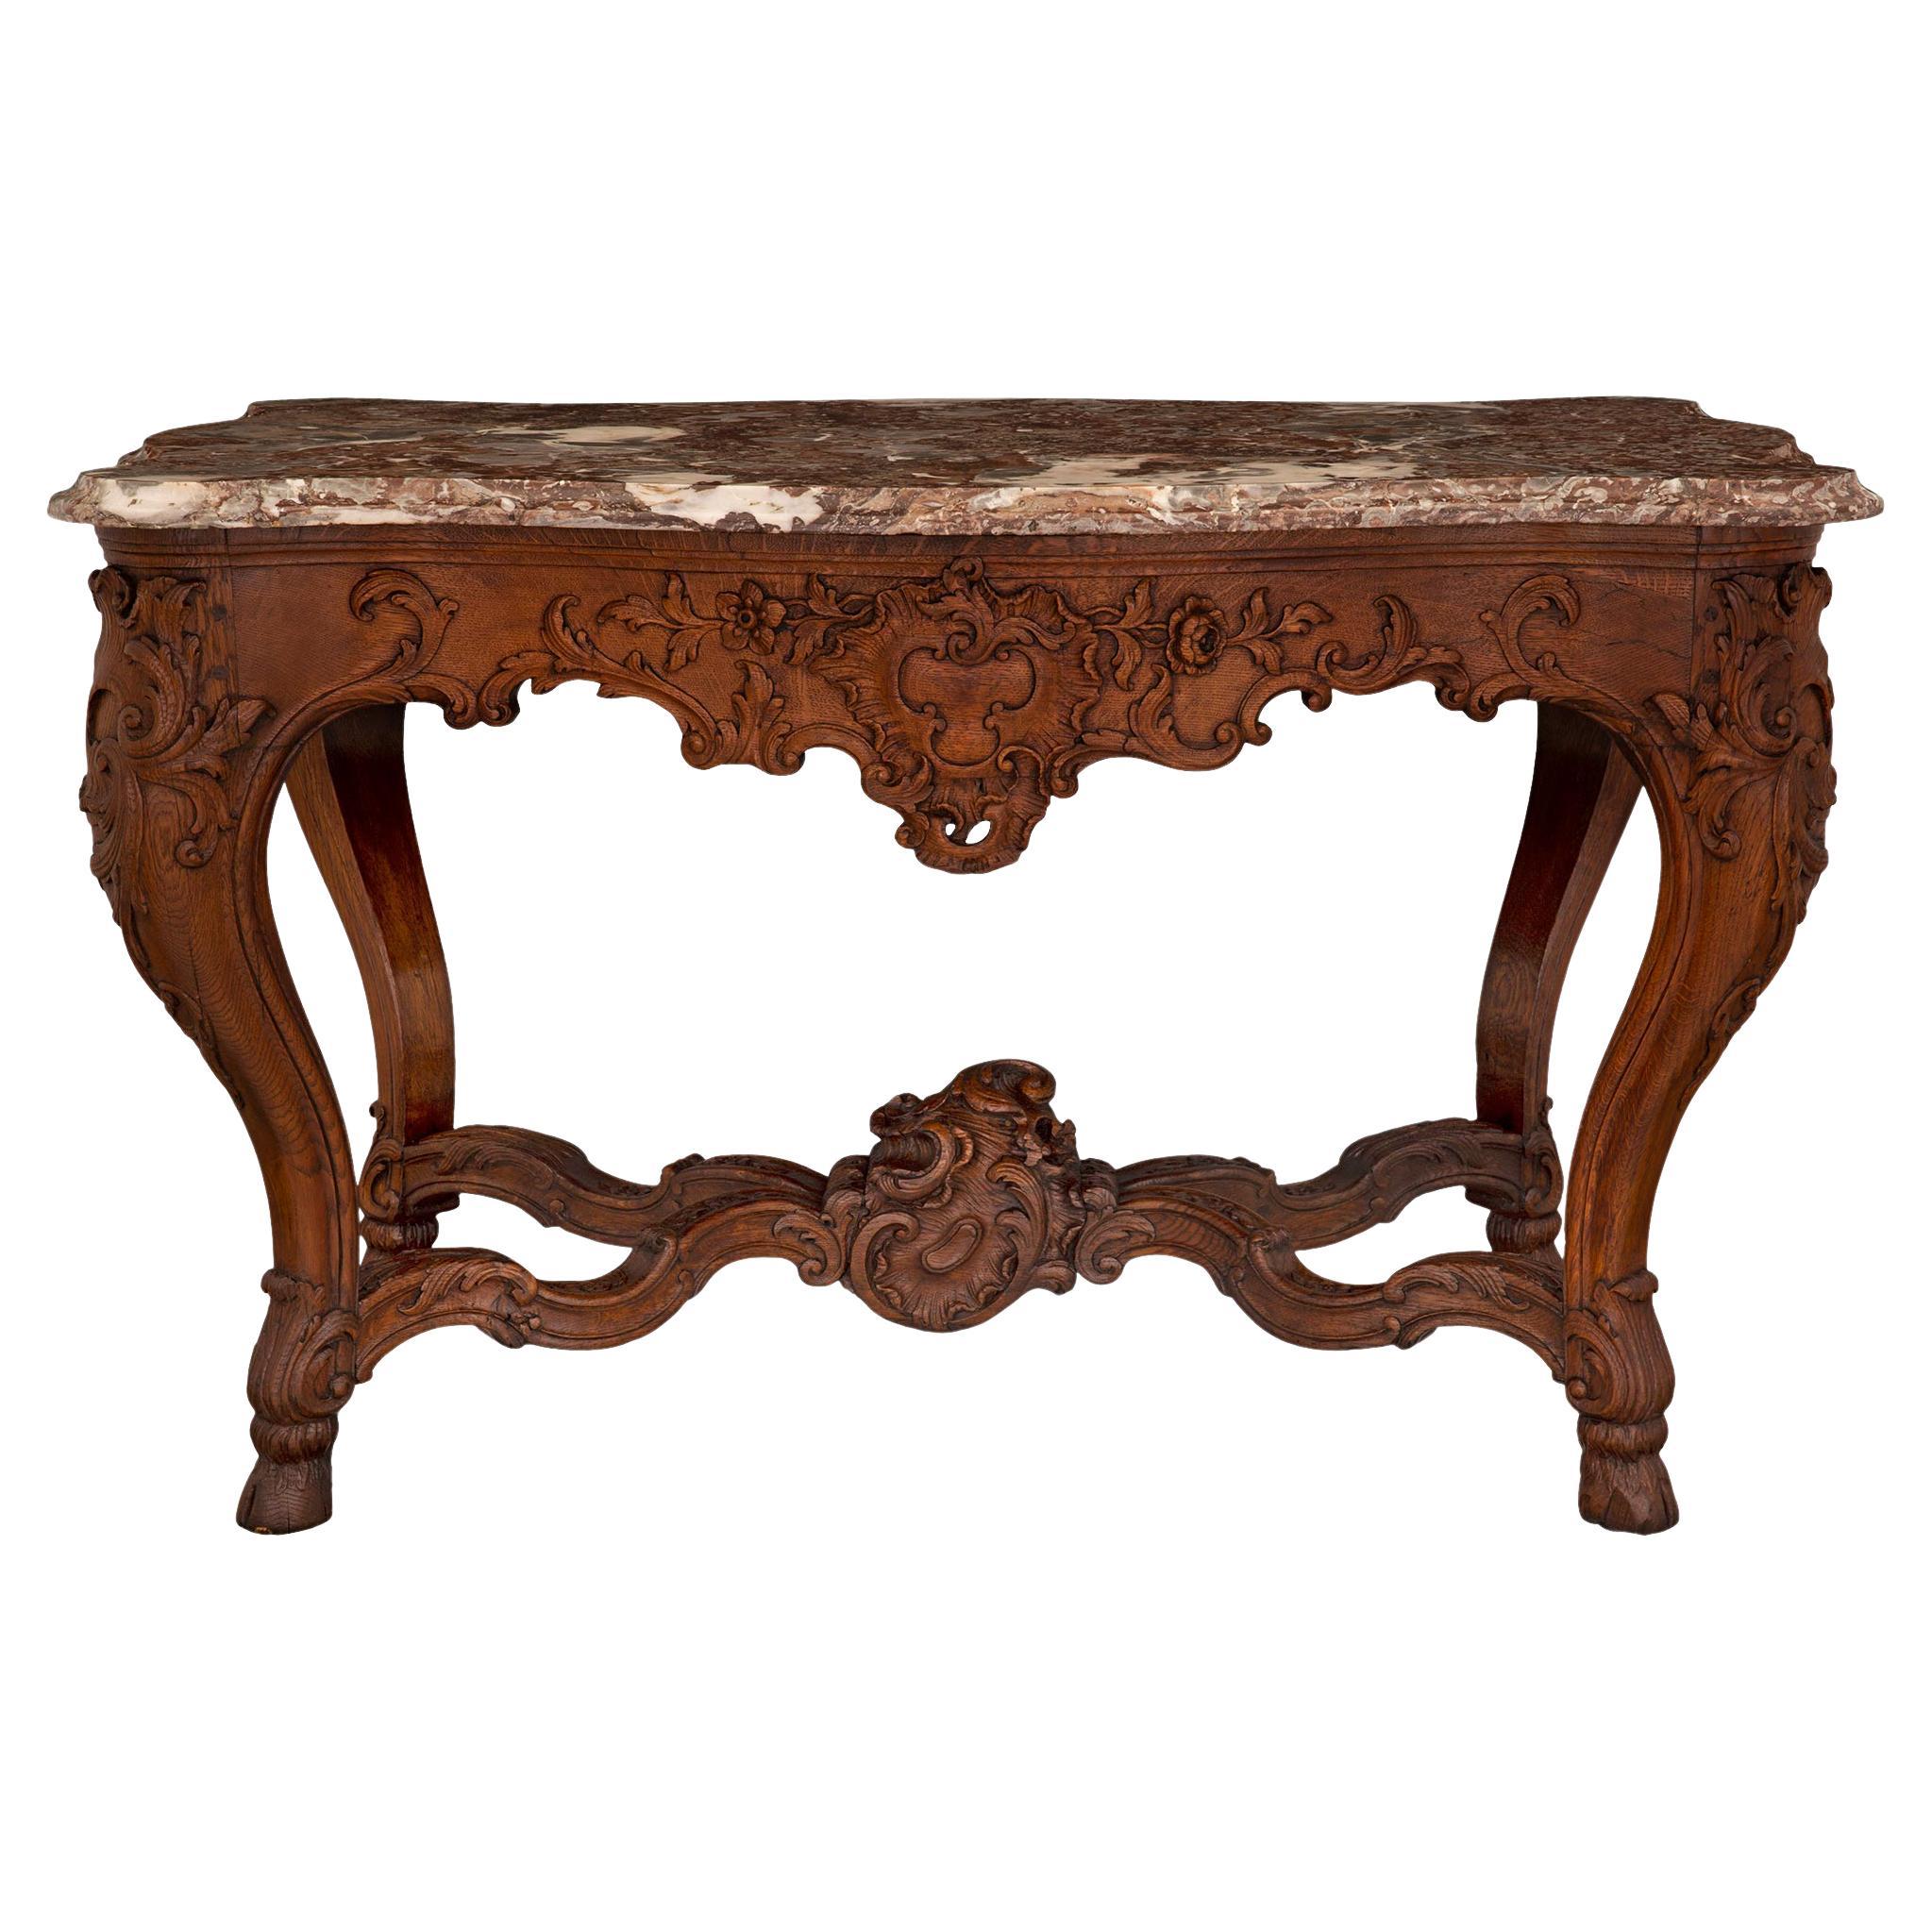 French 18th Century Régence Period Walnut And Marble Center Table